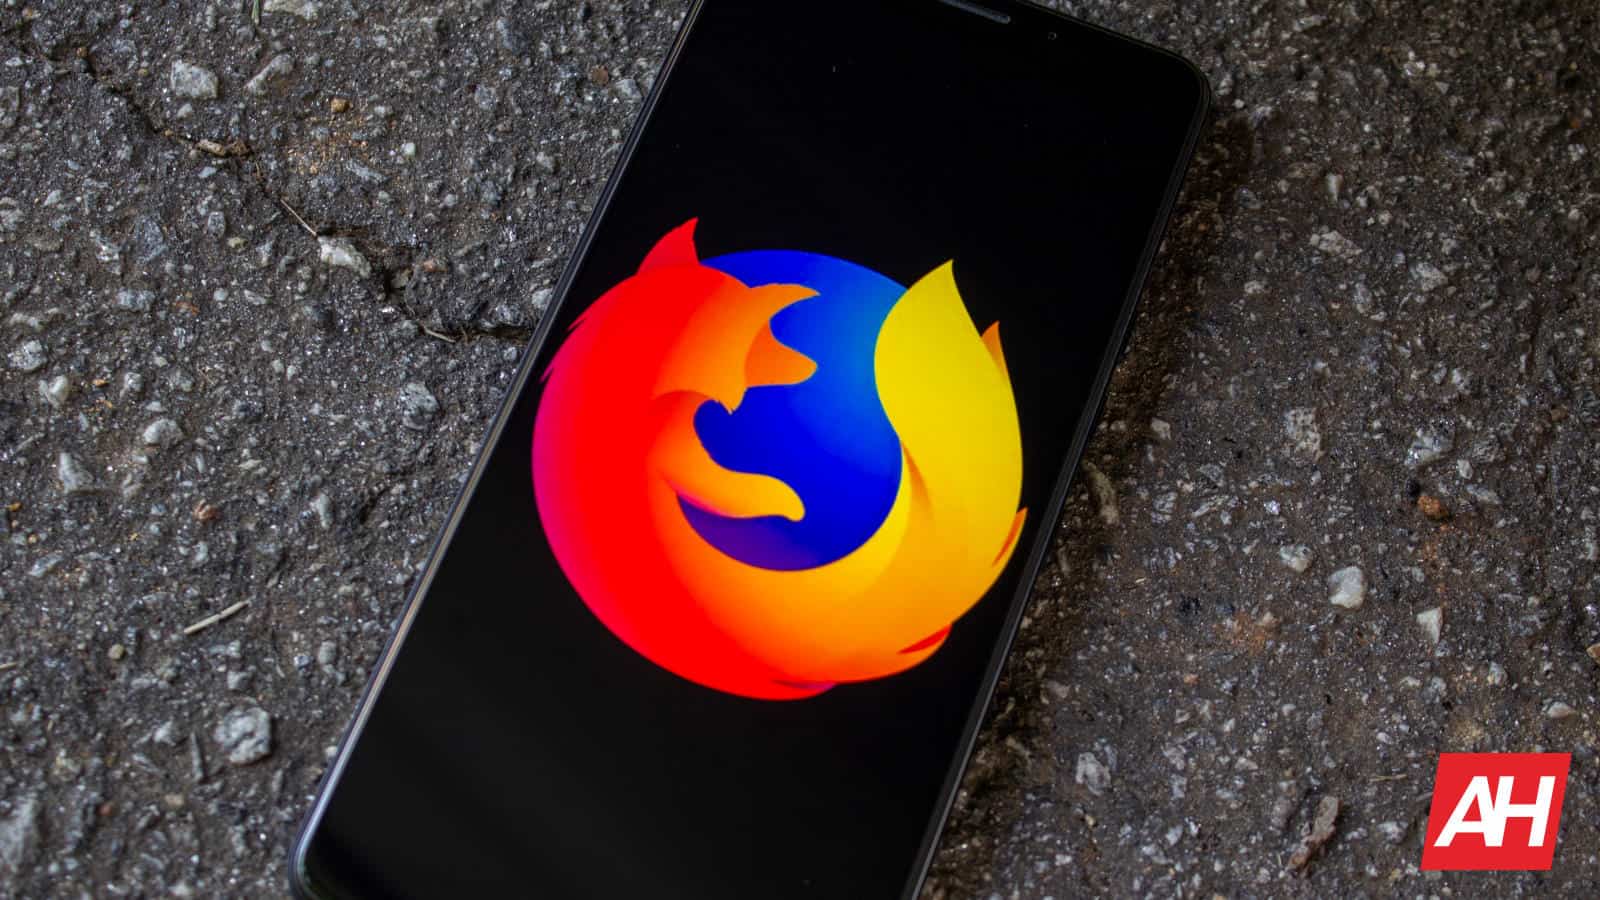 Firefox has a problem and Android phones suffer from it